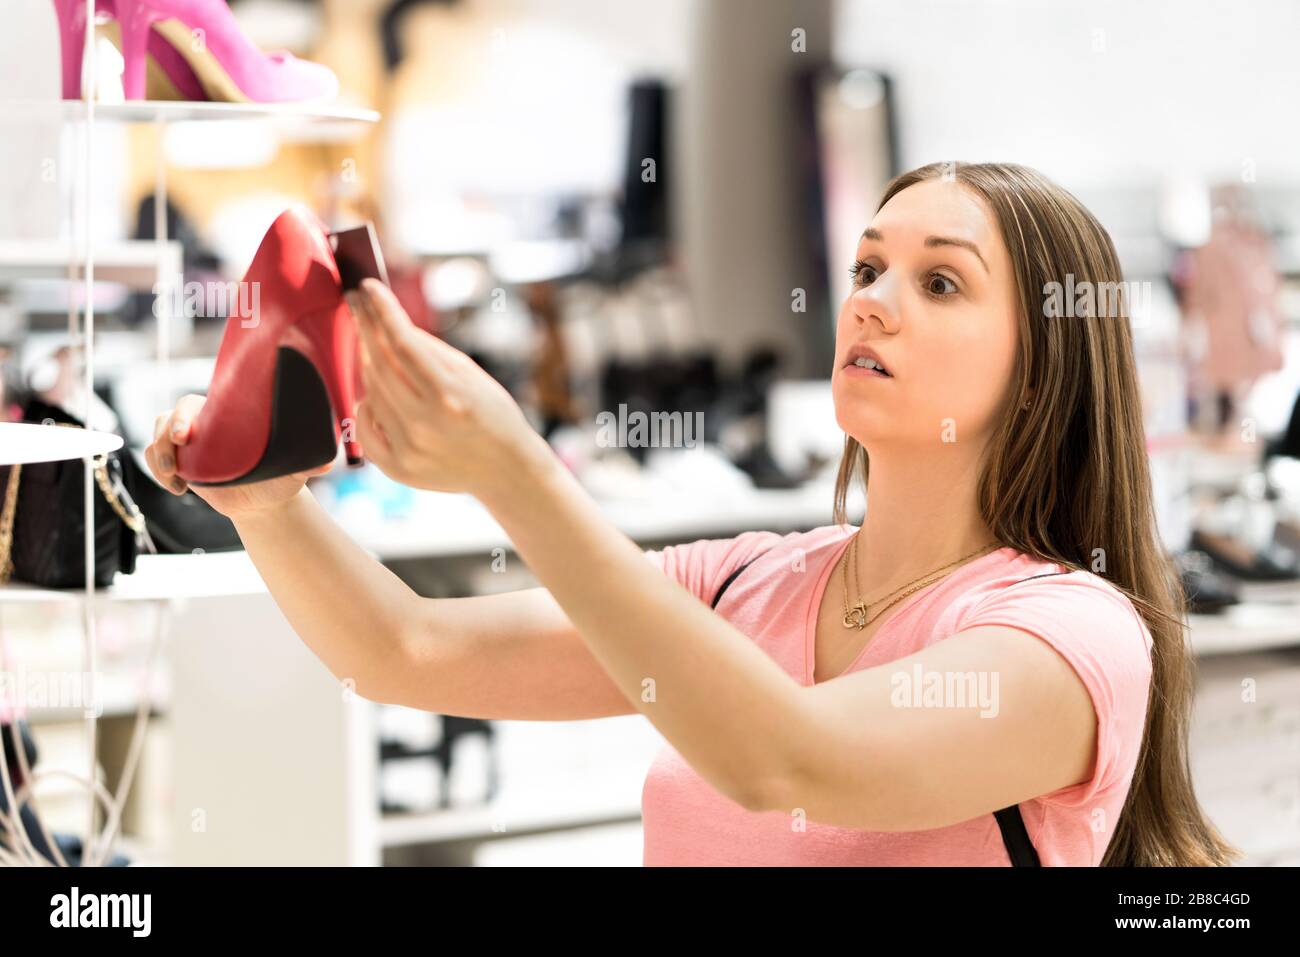 Shocked woman looking at price tag of too expensive shoes in fashion store while shopping. Unhappy customer holding high heels. Stock Photo